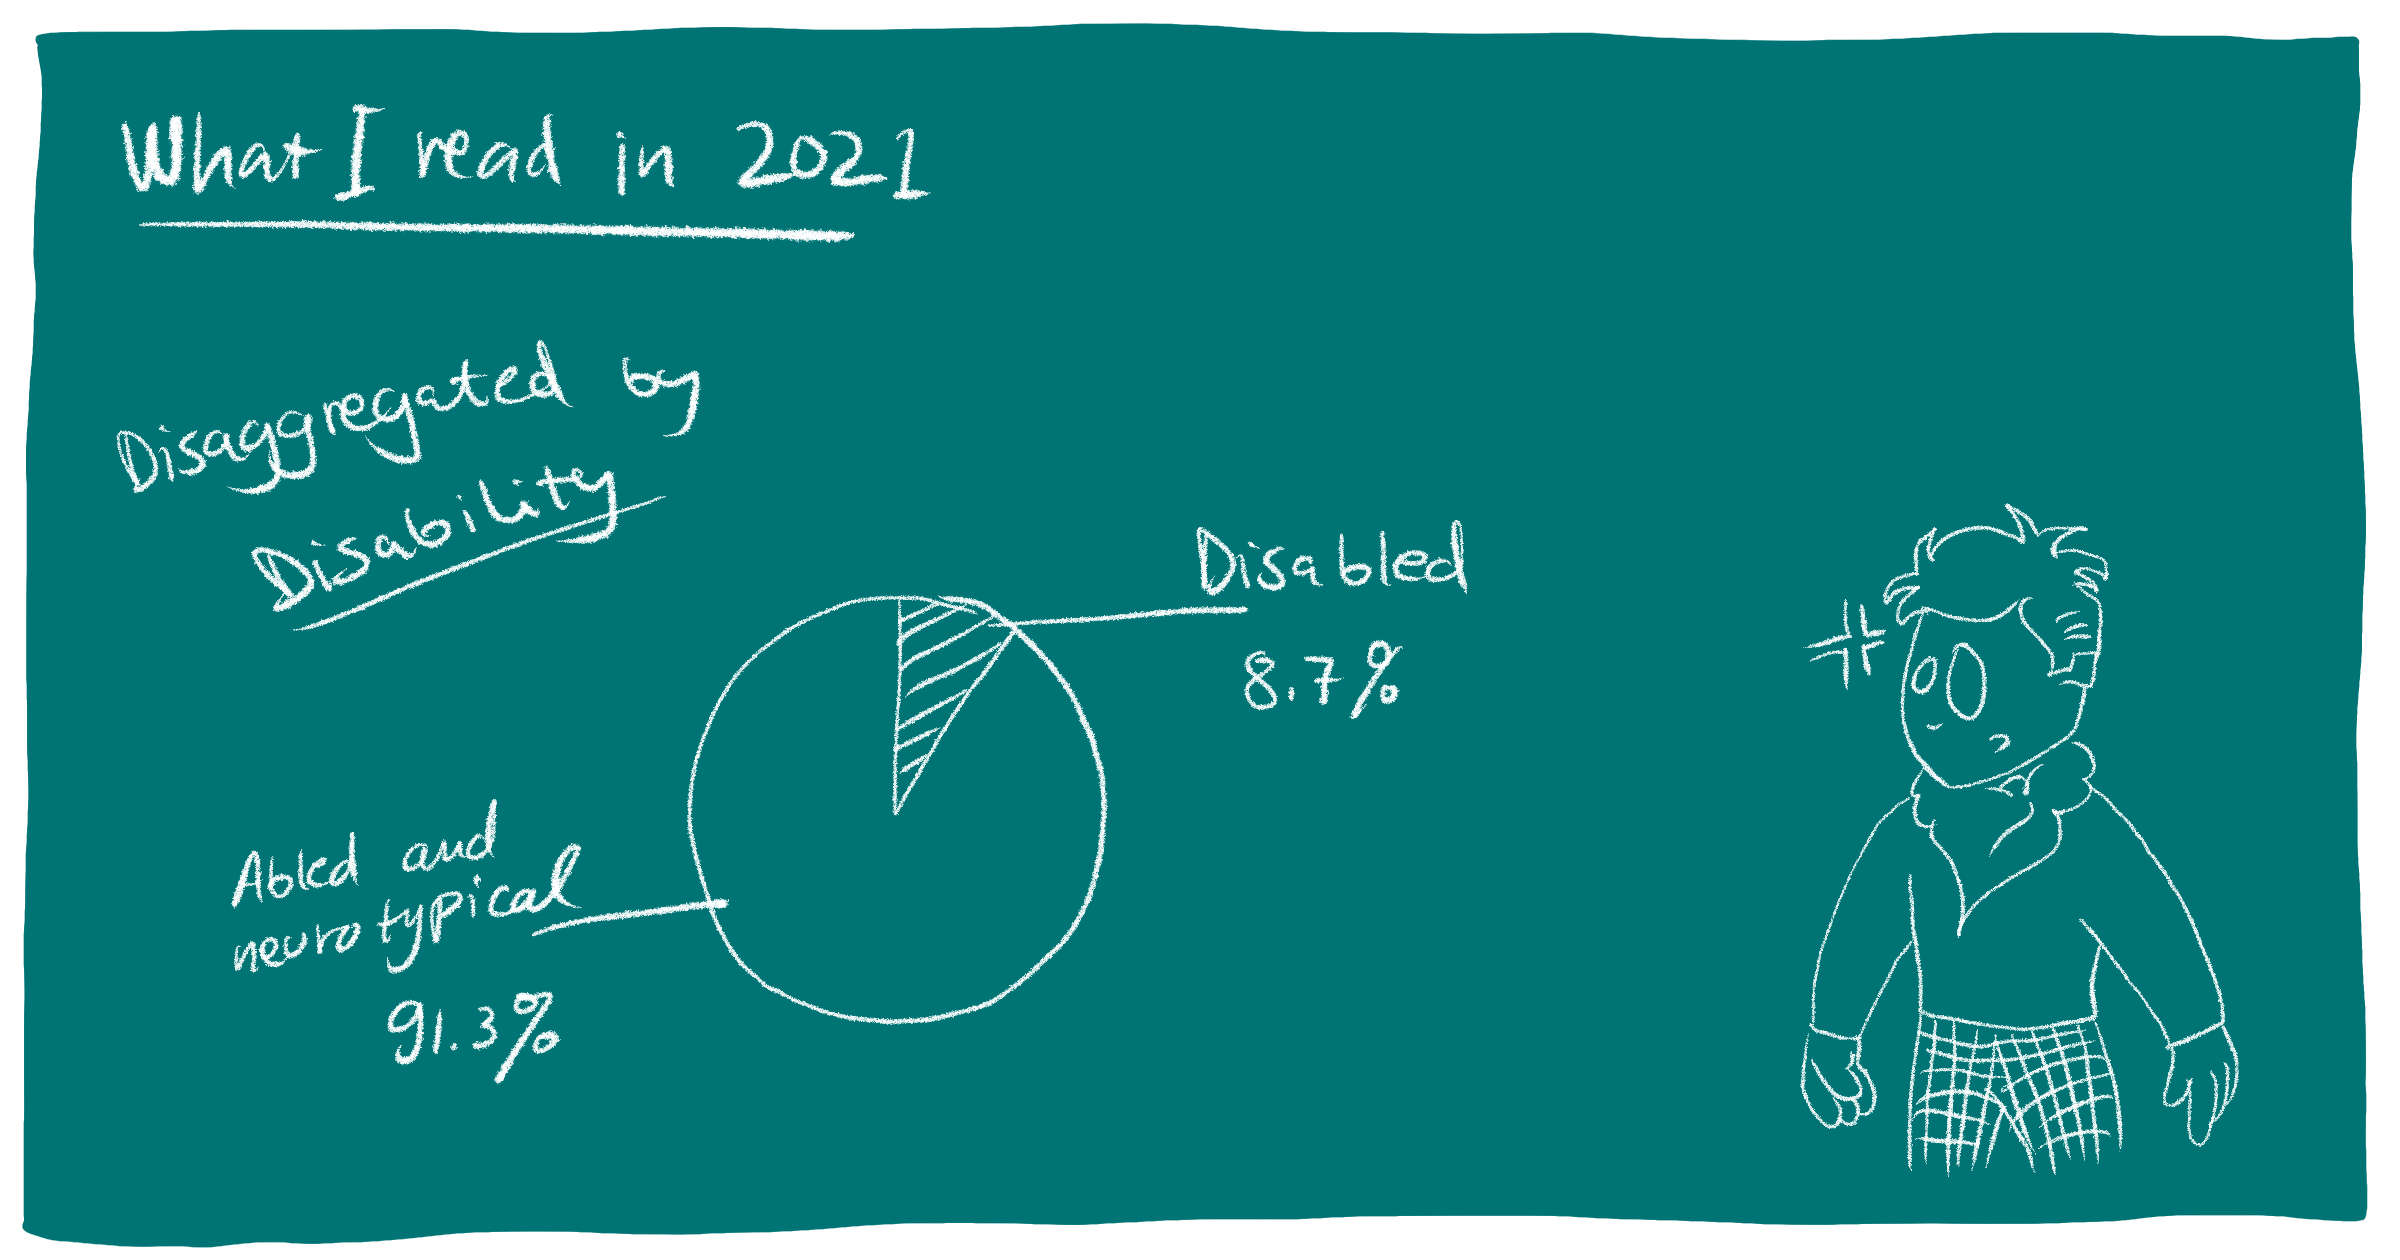 Chalkboard depicting a pie chart of the split, disaggregated by Disability with drawing of Disney Carlos in a corner looking concerned.